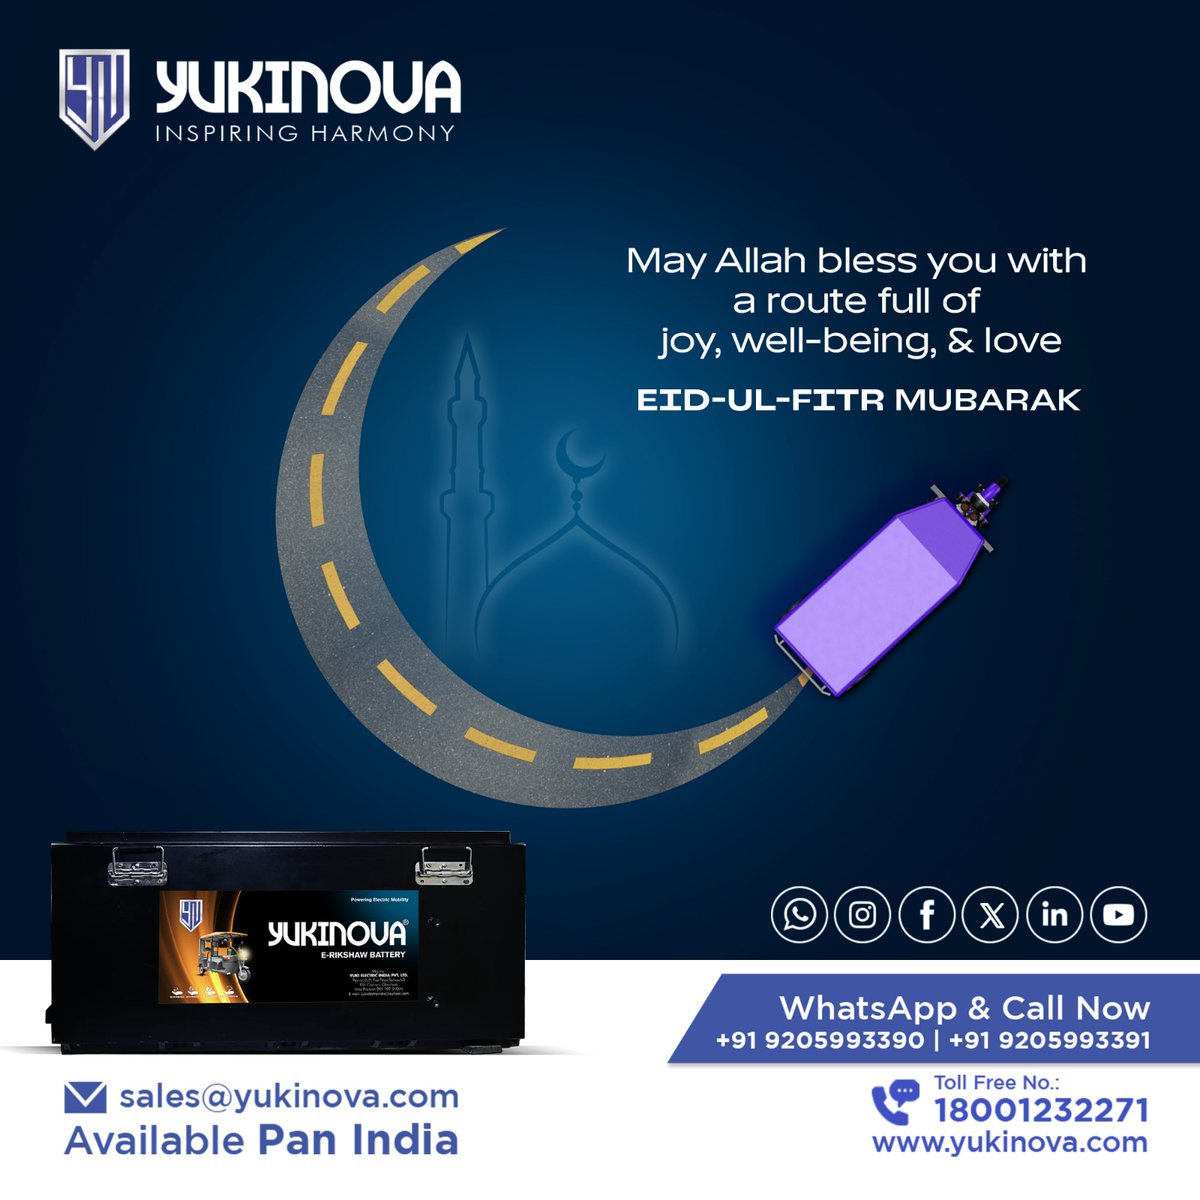 Eid-ul-Fitr is a time of gratitude and generosity. Let's extend a hand of kindness, share our blessings, and spread joy to those in need. May Allah’s blessing be with you. Eid Mubarak from team Yukinova!🌛

Follow us : @yukinova 

#EidUlFitrMubarak #RamadanEid #Eid2024